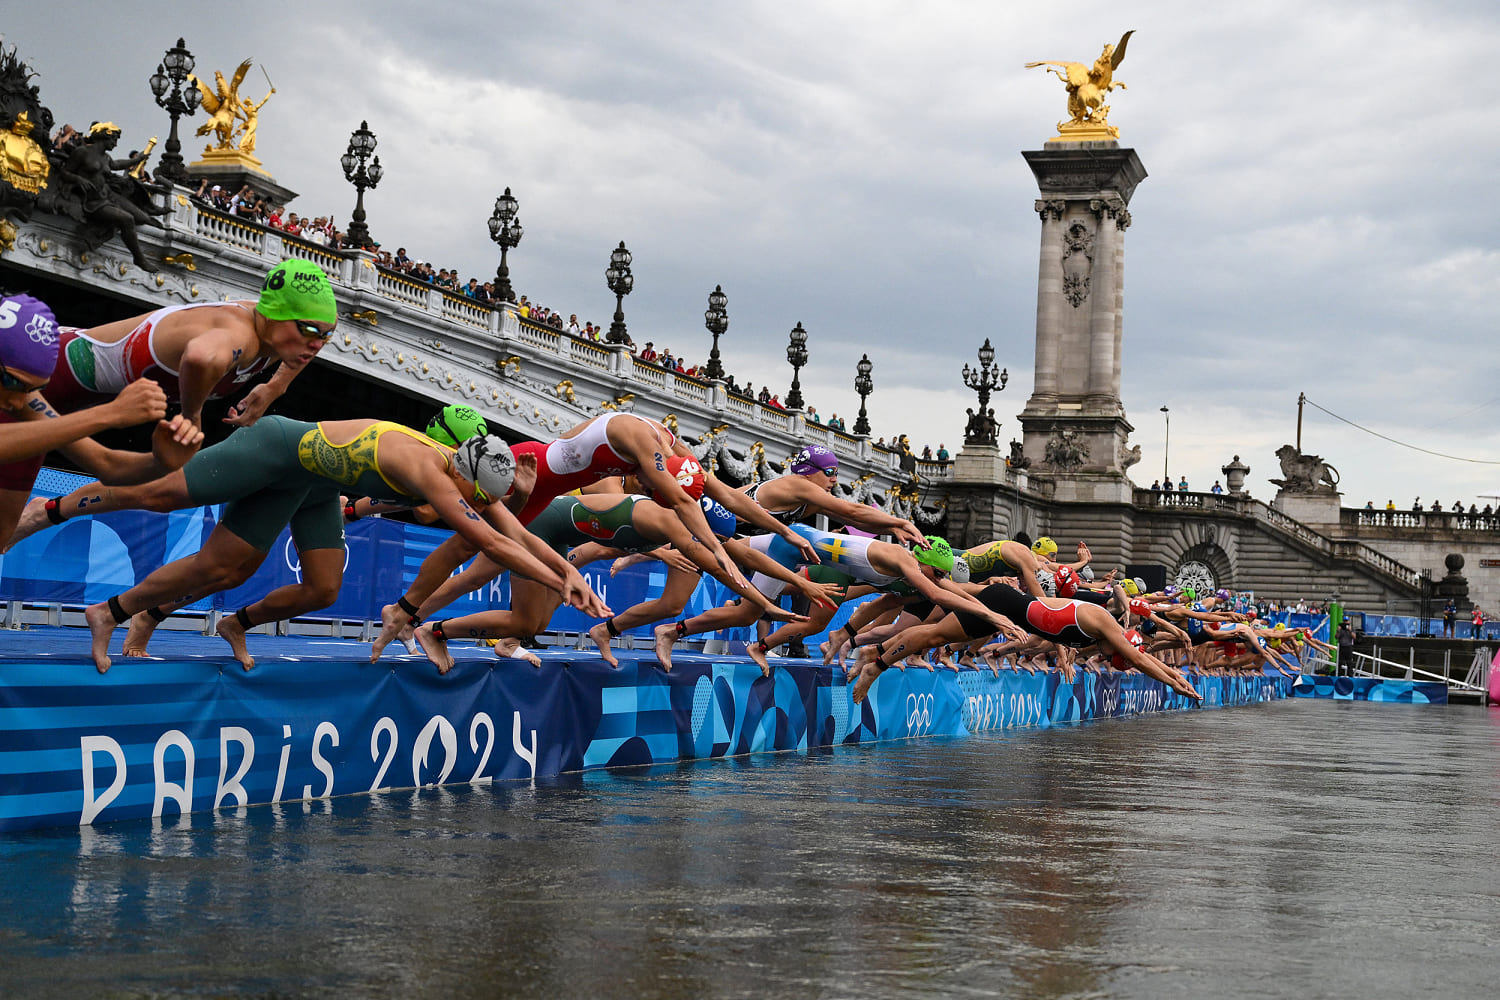 Here are the best photos from the Paris Games so far